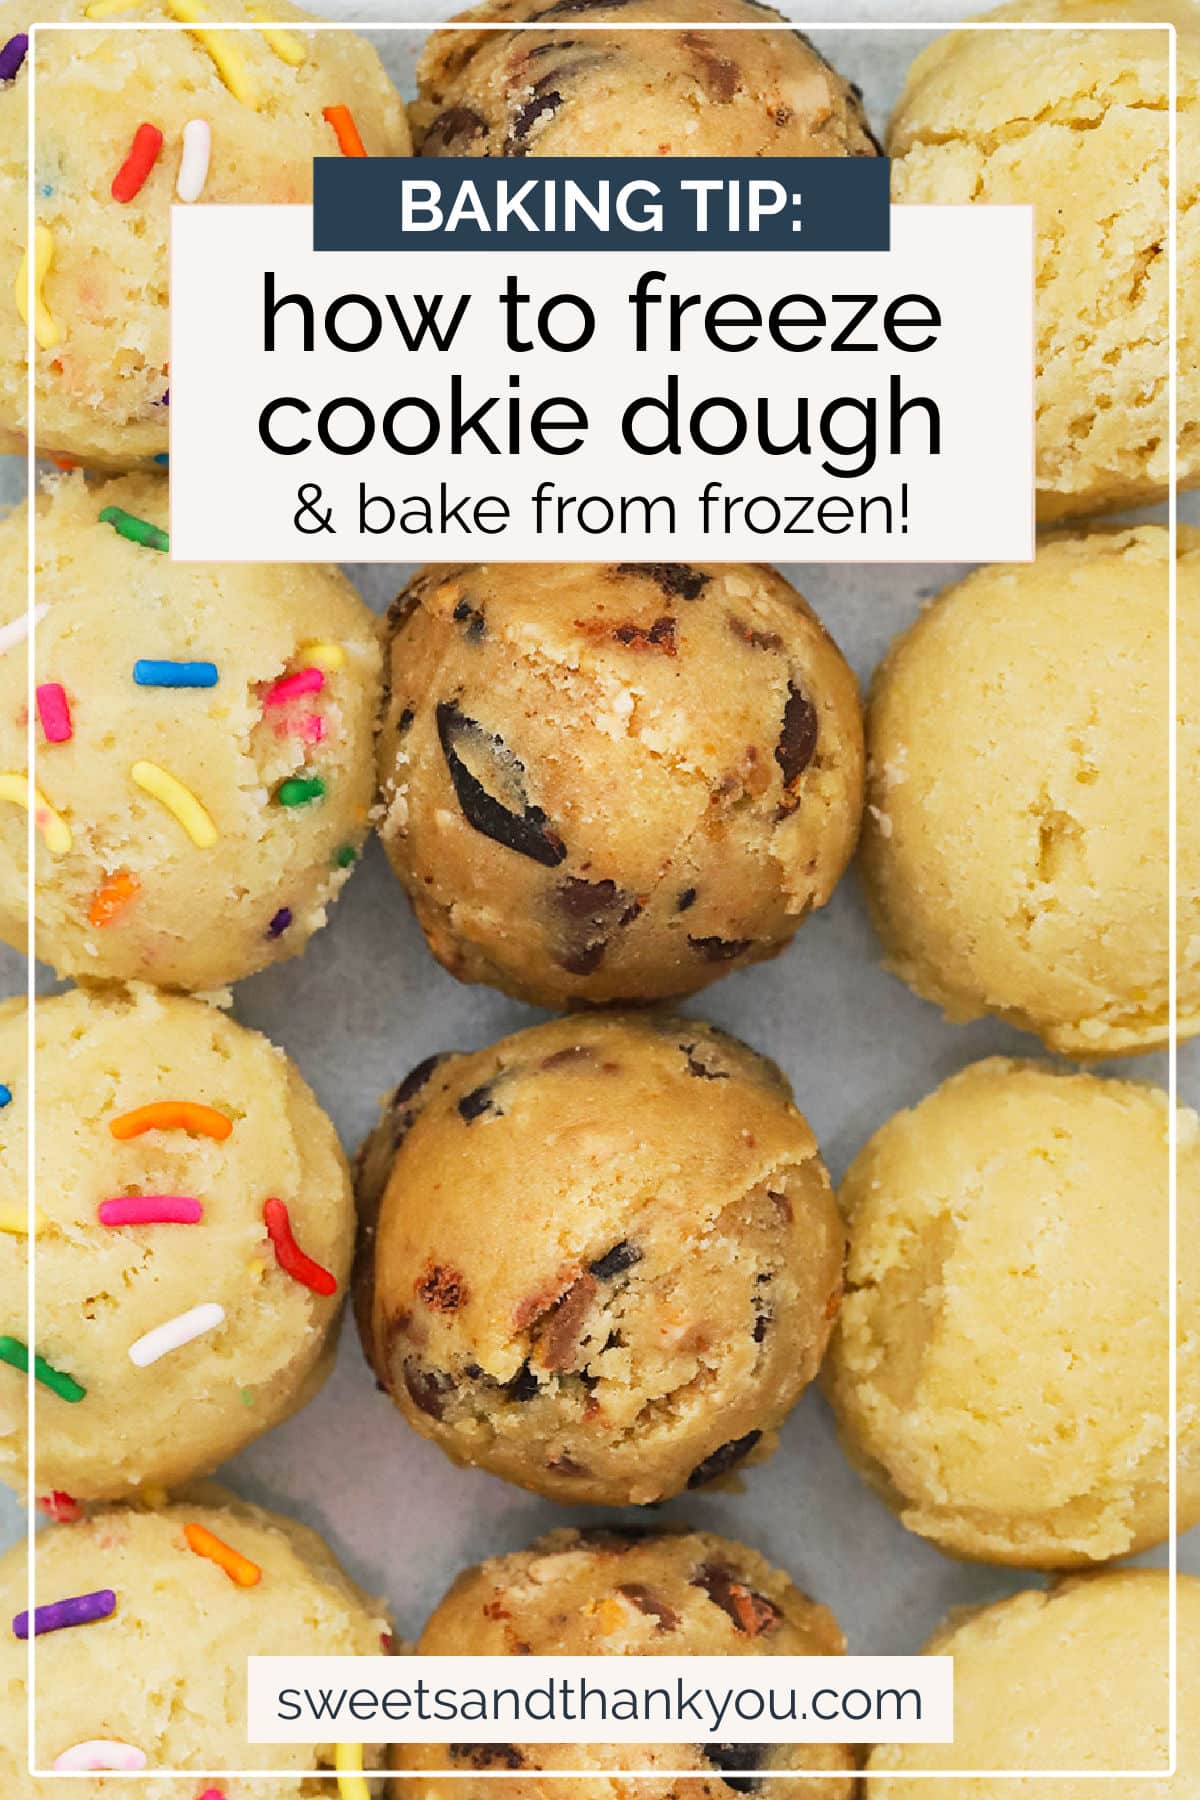 How To Freeze Cookie Dough - All the tips, tricks, and techniques you need to freeze cookie dough and how to bake frozen cookie dough when you need it. Now you can always have cookies on hand! // How to freeze cookies // how to bake frozen cookie dough // baking tips // gluten free cookie dough // gluten free freezer recipes // how to bake cookie dough from frozen